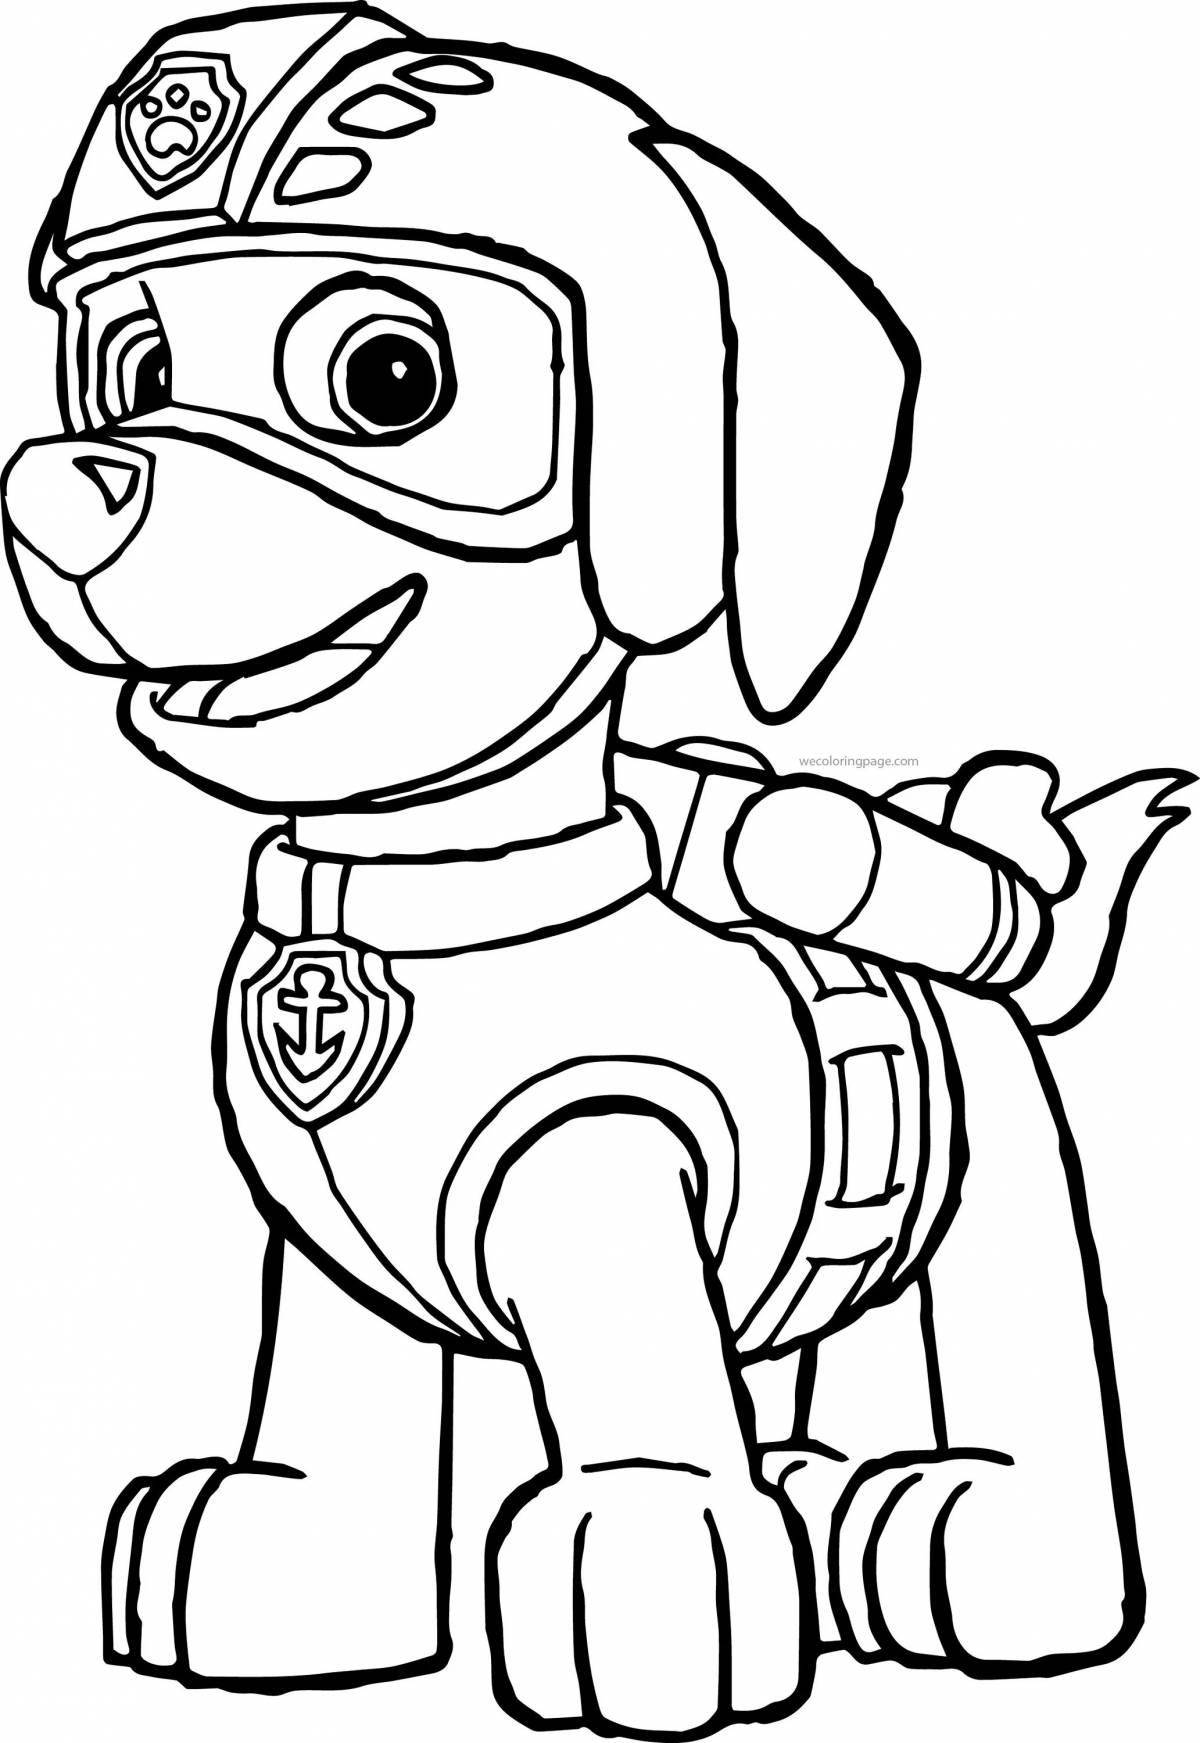 Amazing Paw Patrol Coloring Page